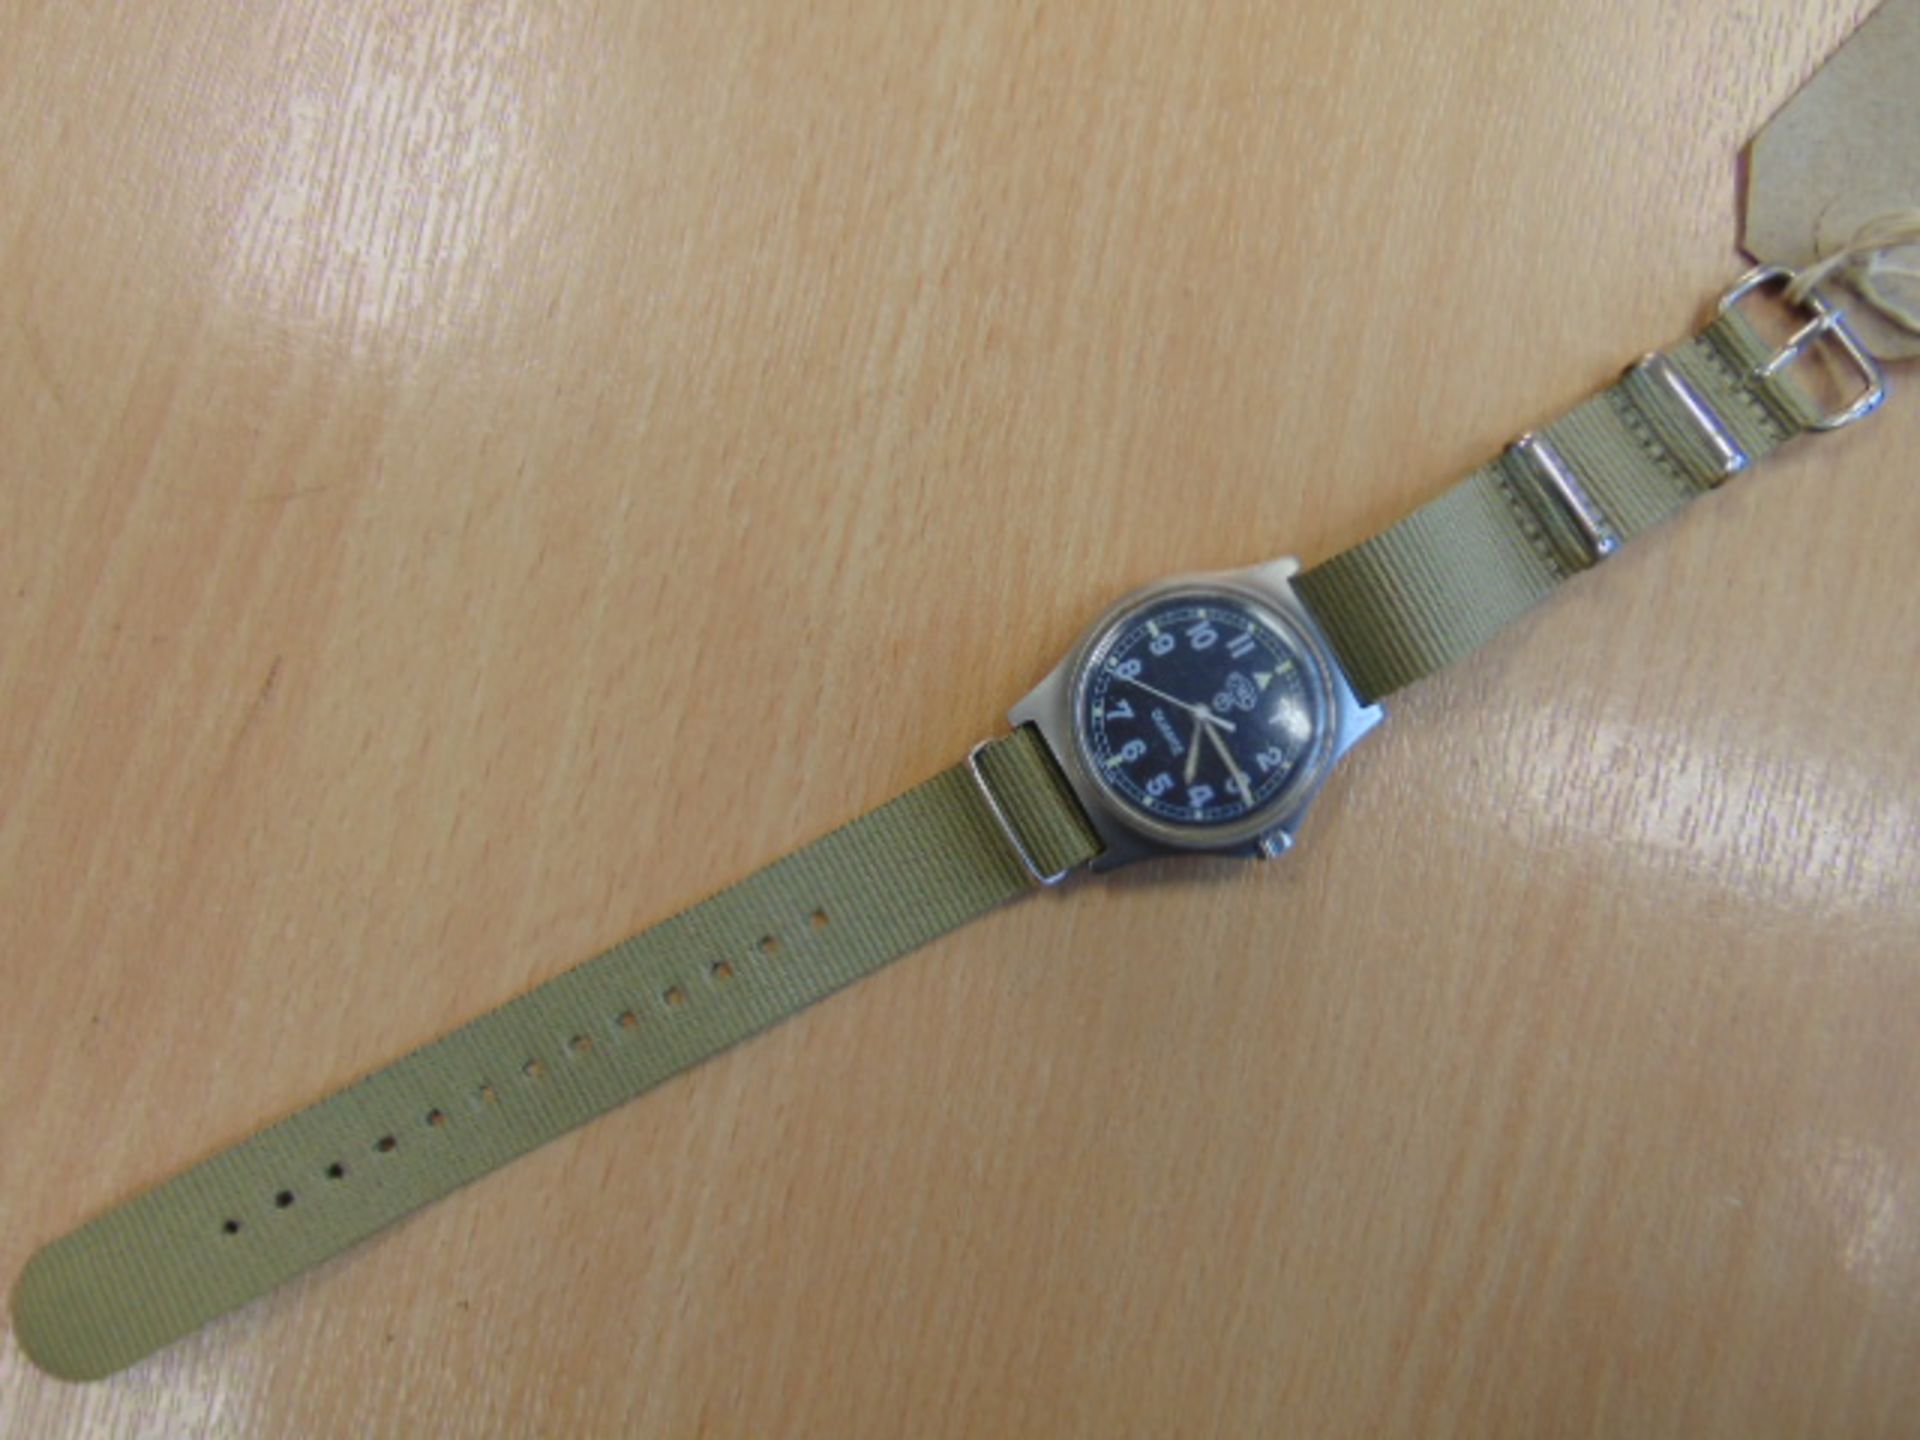 CWC W10 SERVICE WATCH NATO MARKED DATED 1991 (GULF WAR) - Image 5 of 5